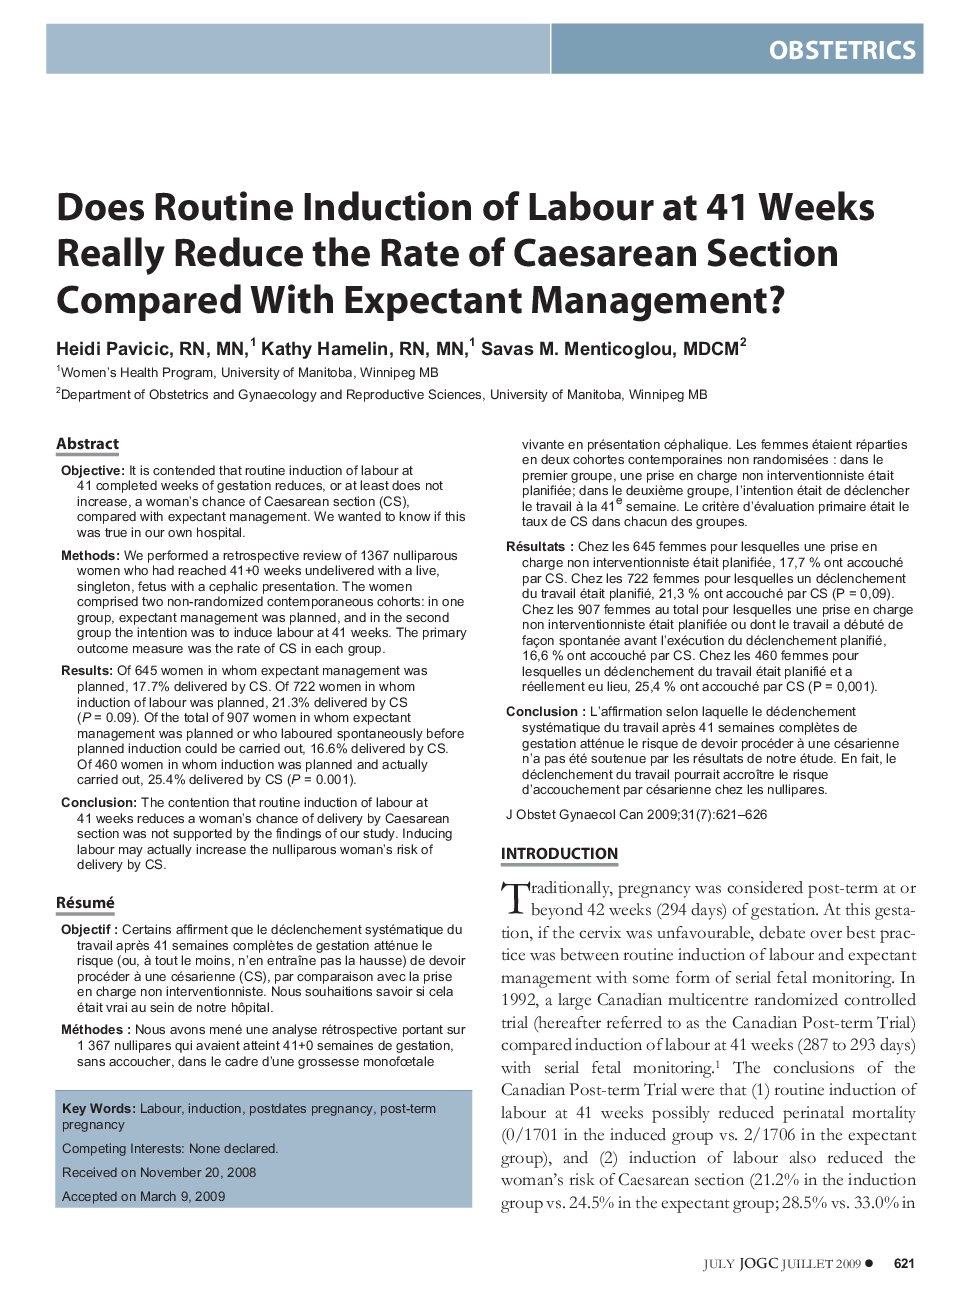 Does Routine Induction of Labour at 41 Weeks Really Reduce the Rate of Caesarean Section Compared With Expectant Management?